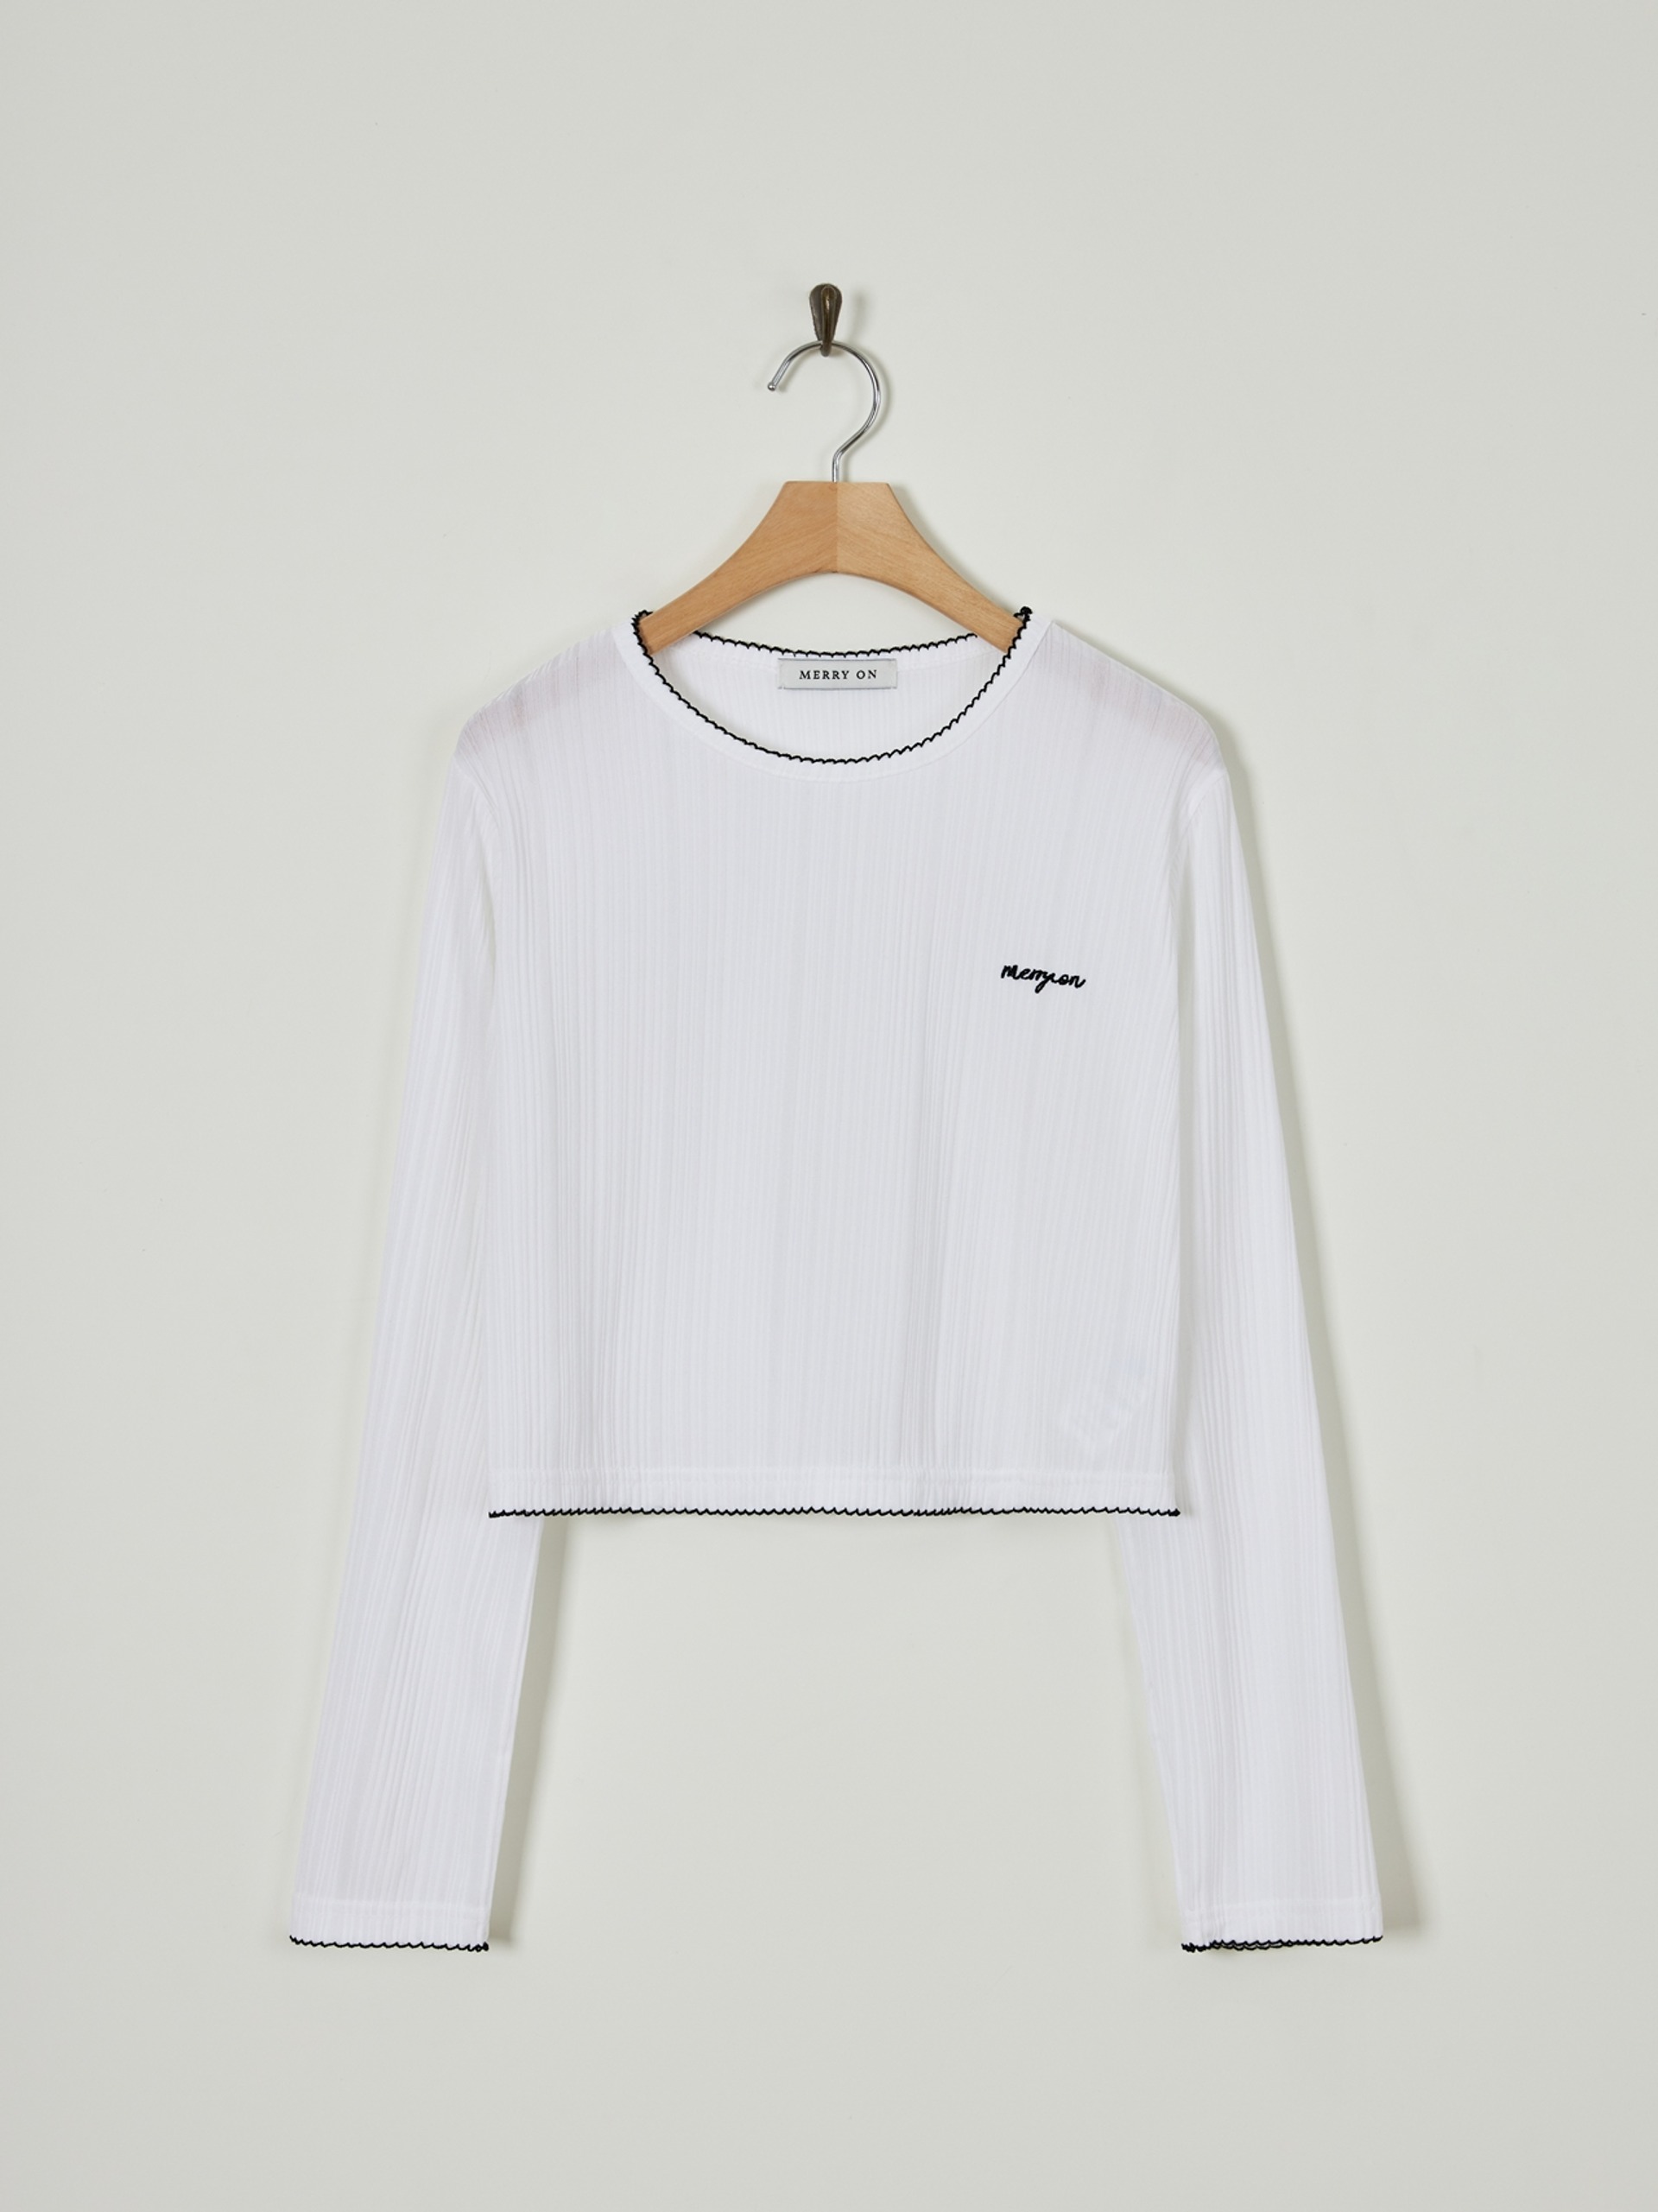 Bess Wave T-shirt[IVORY][Departure today]